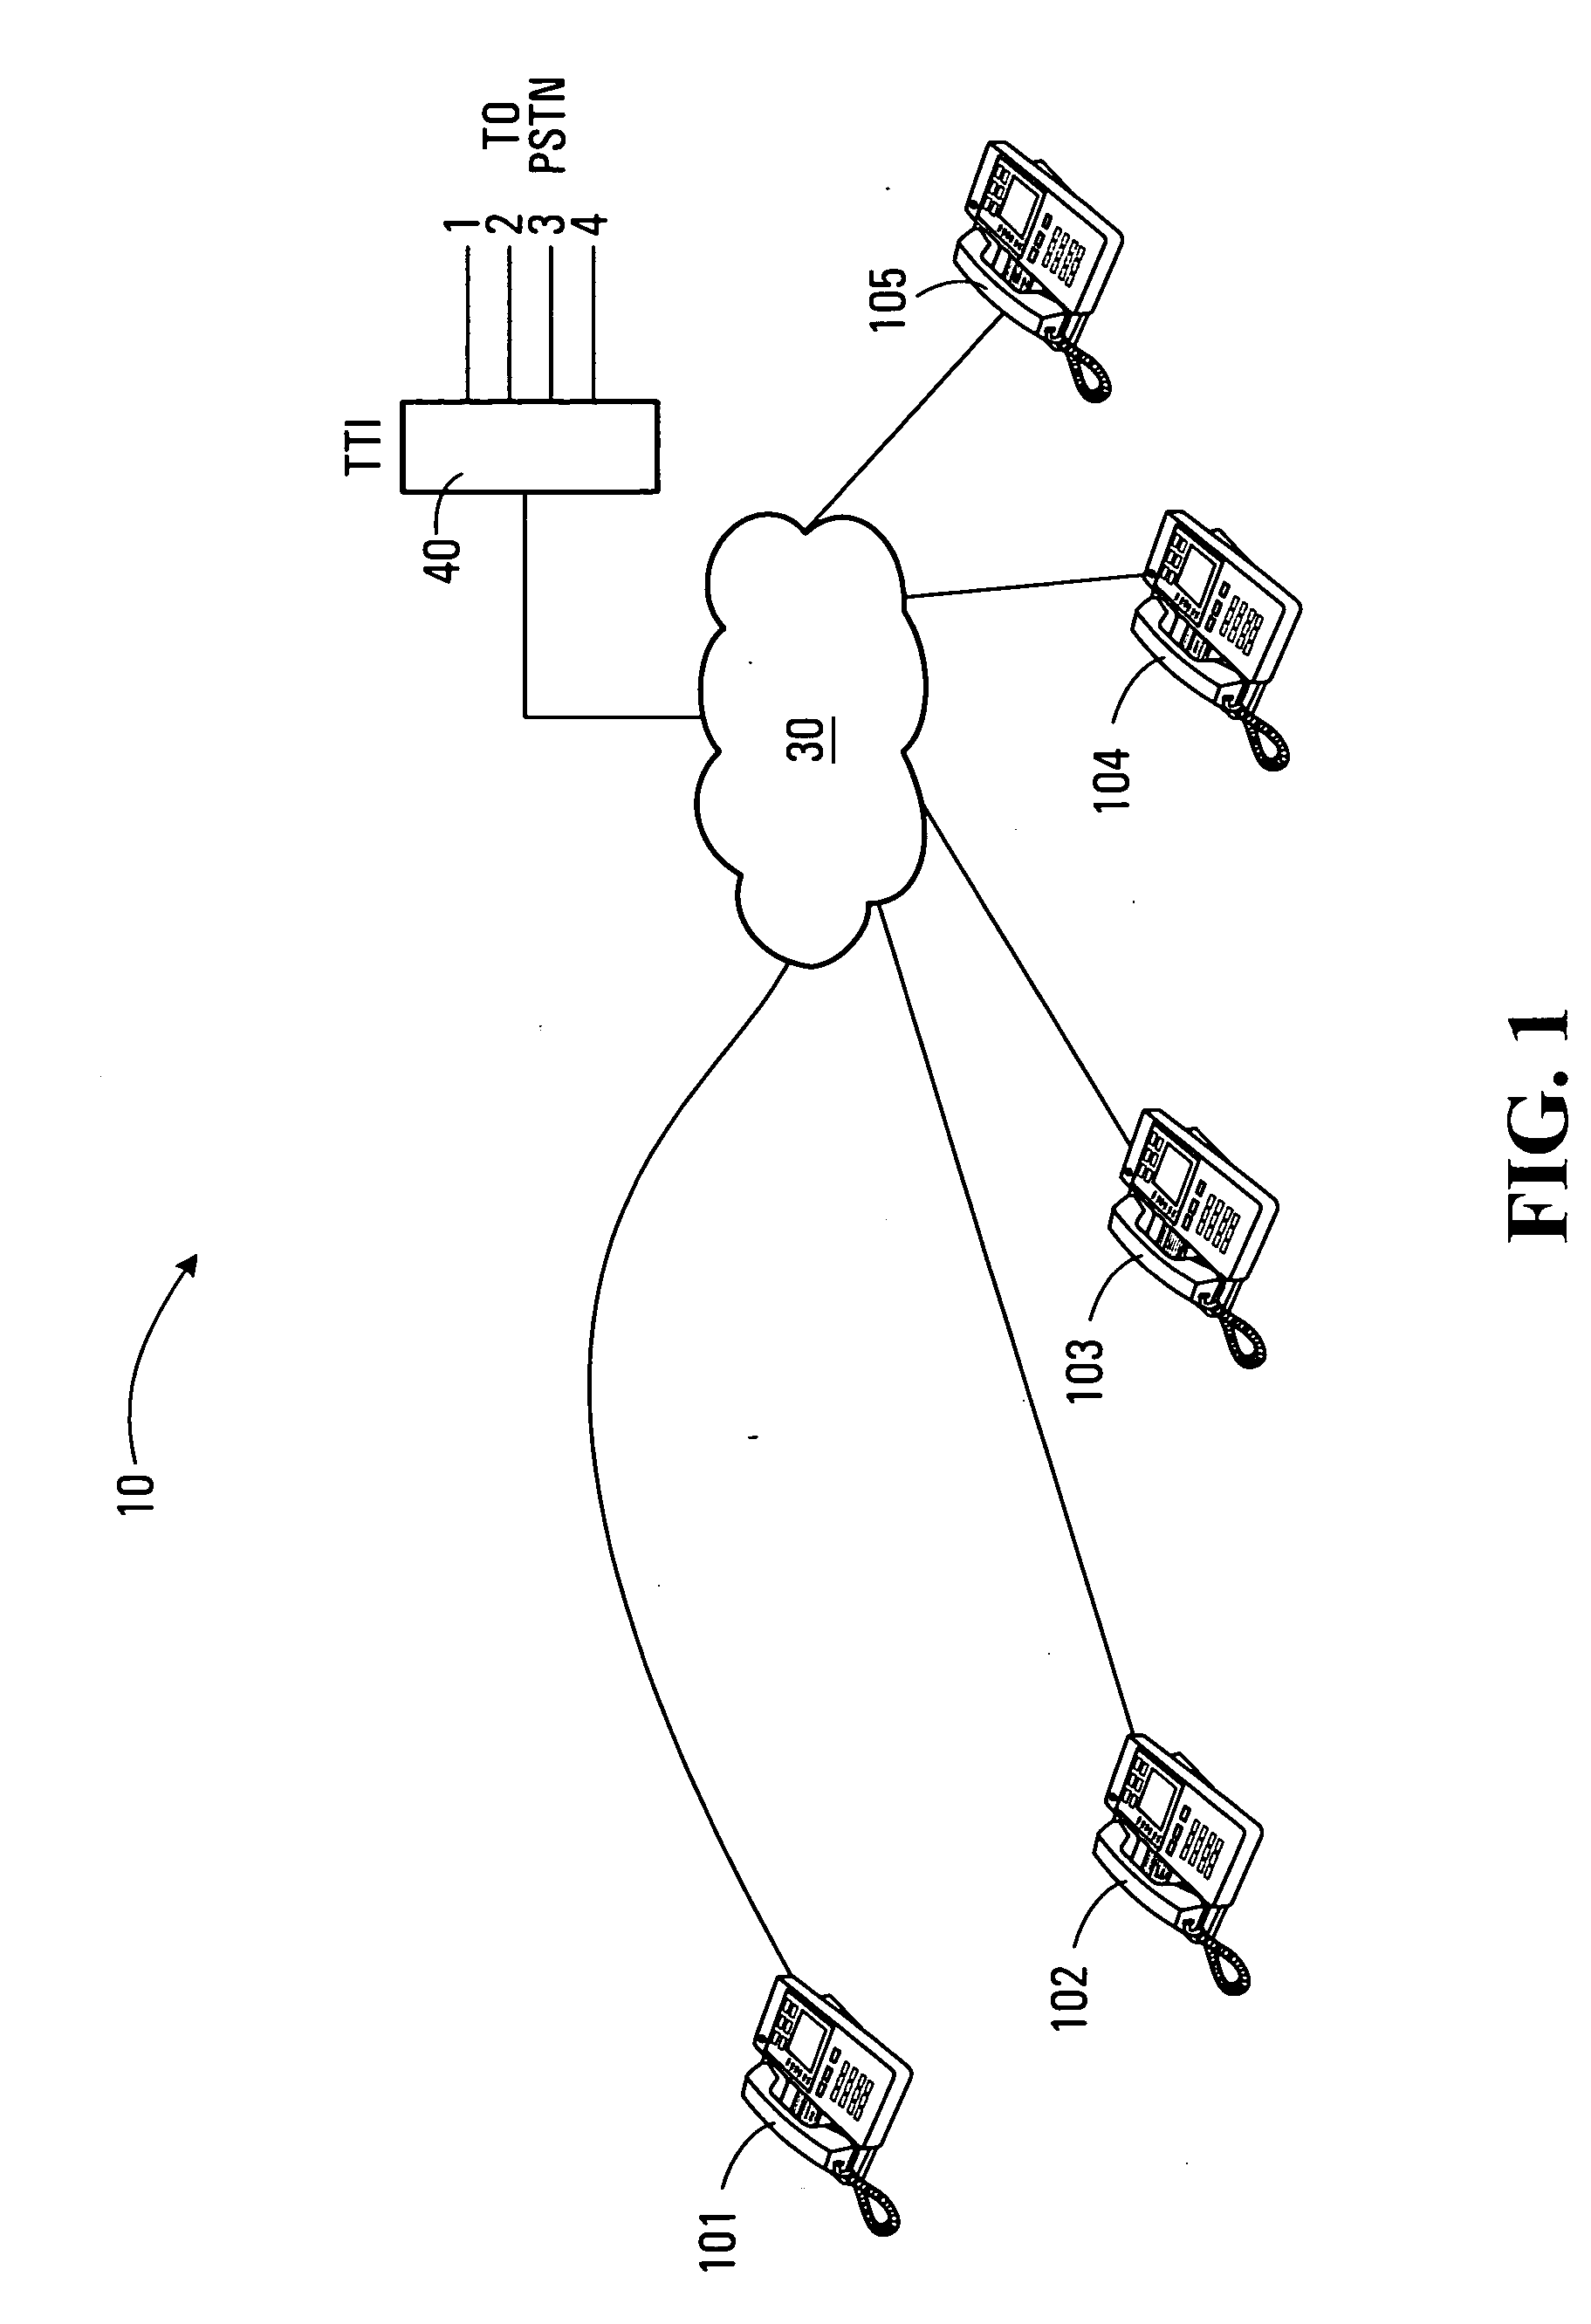 Voice mail system, method and network devices